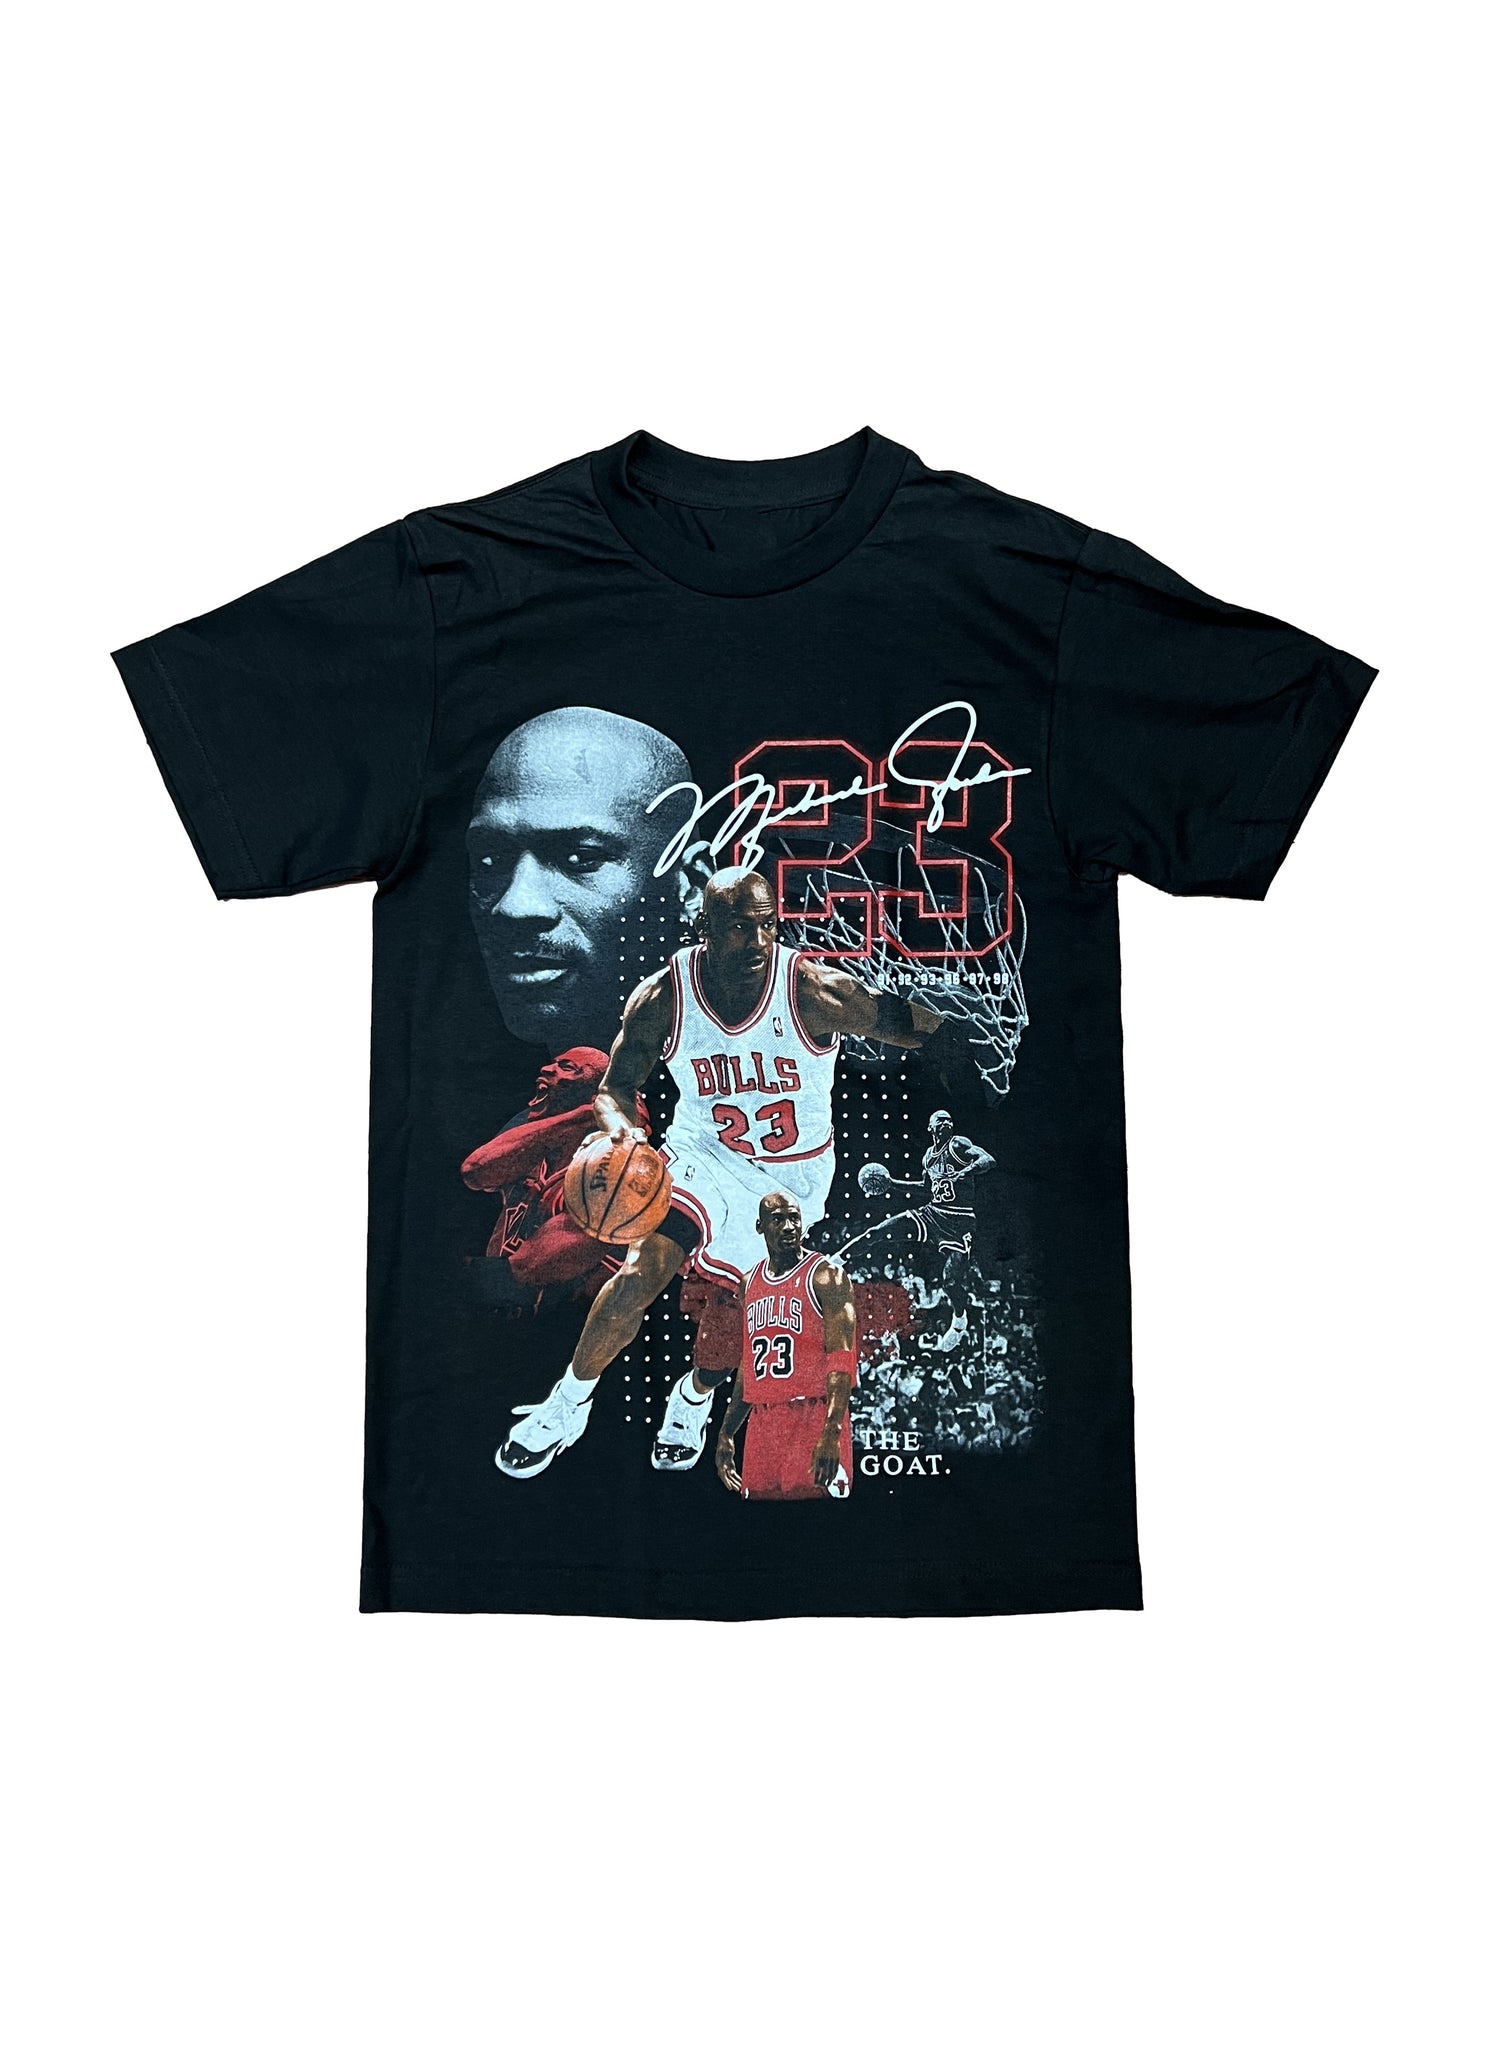 The GOAT Graphic Tee